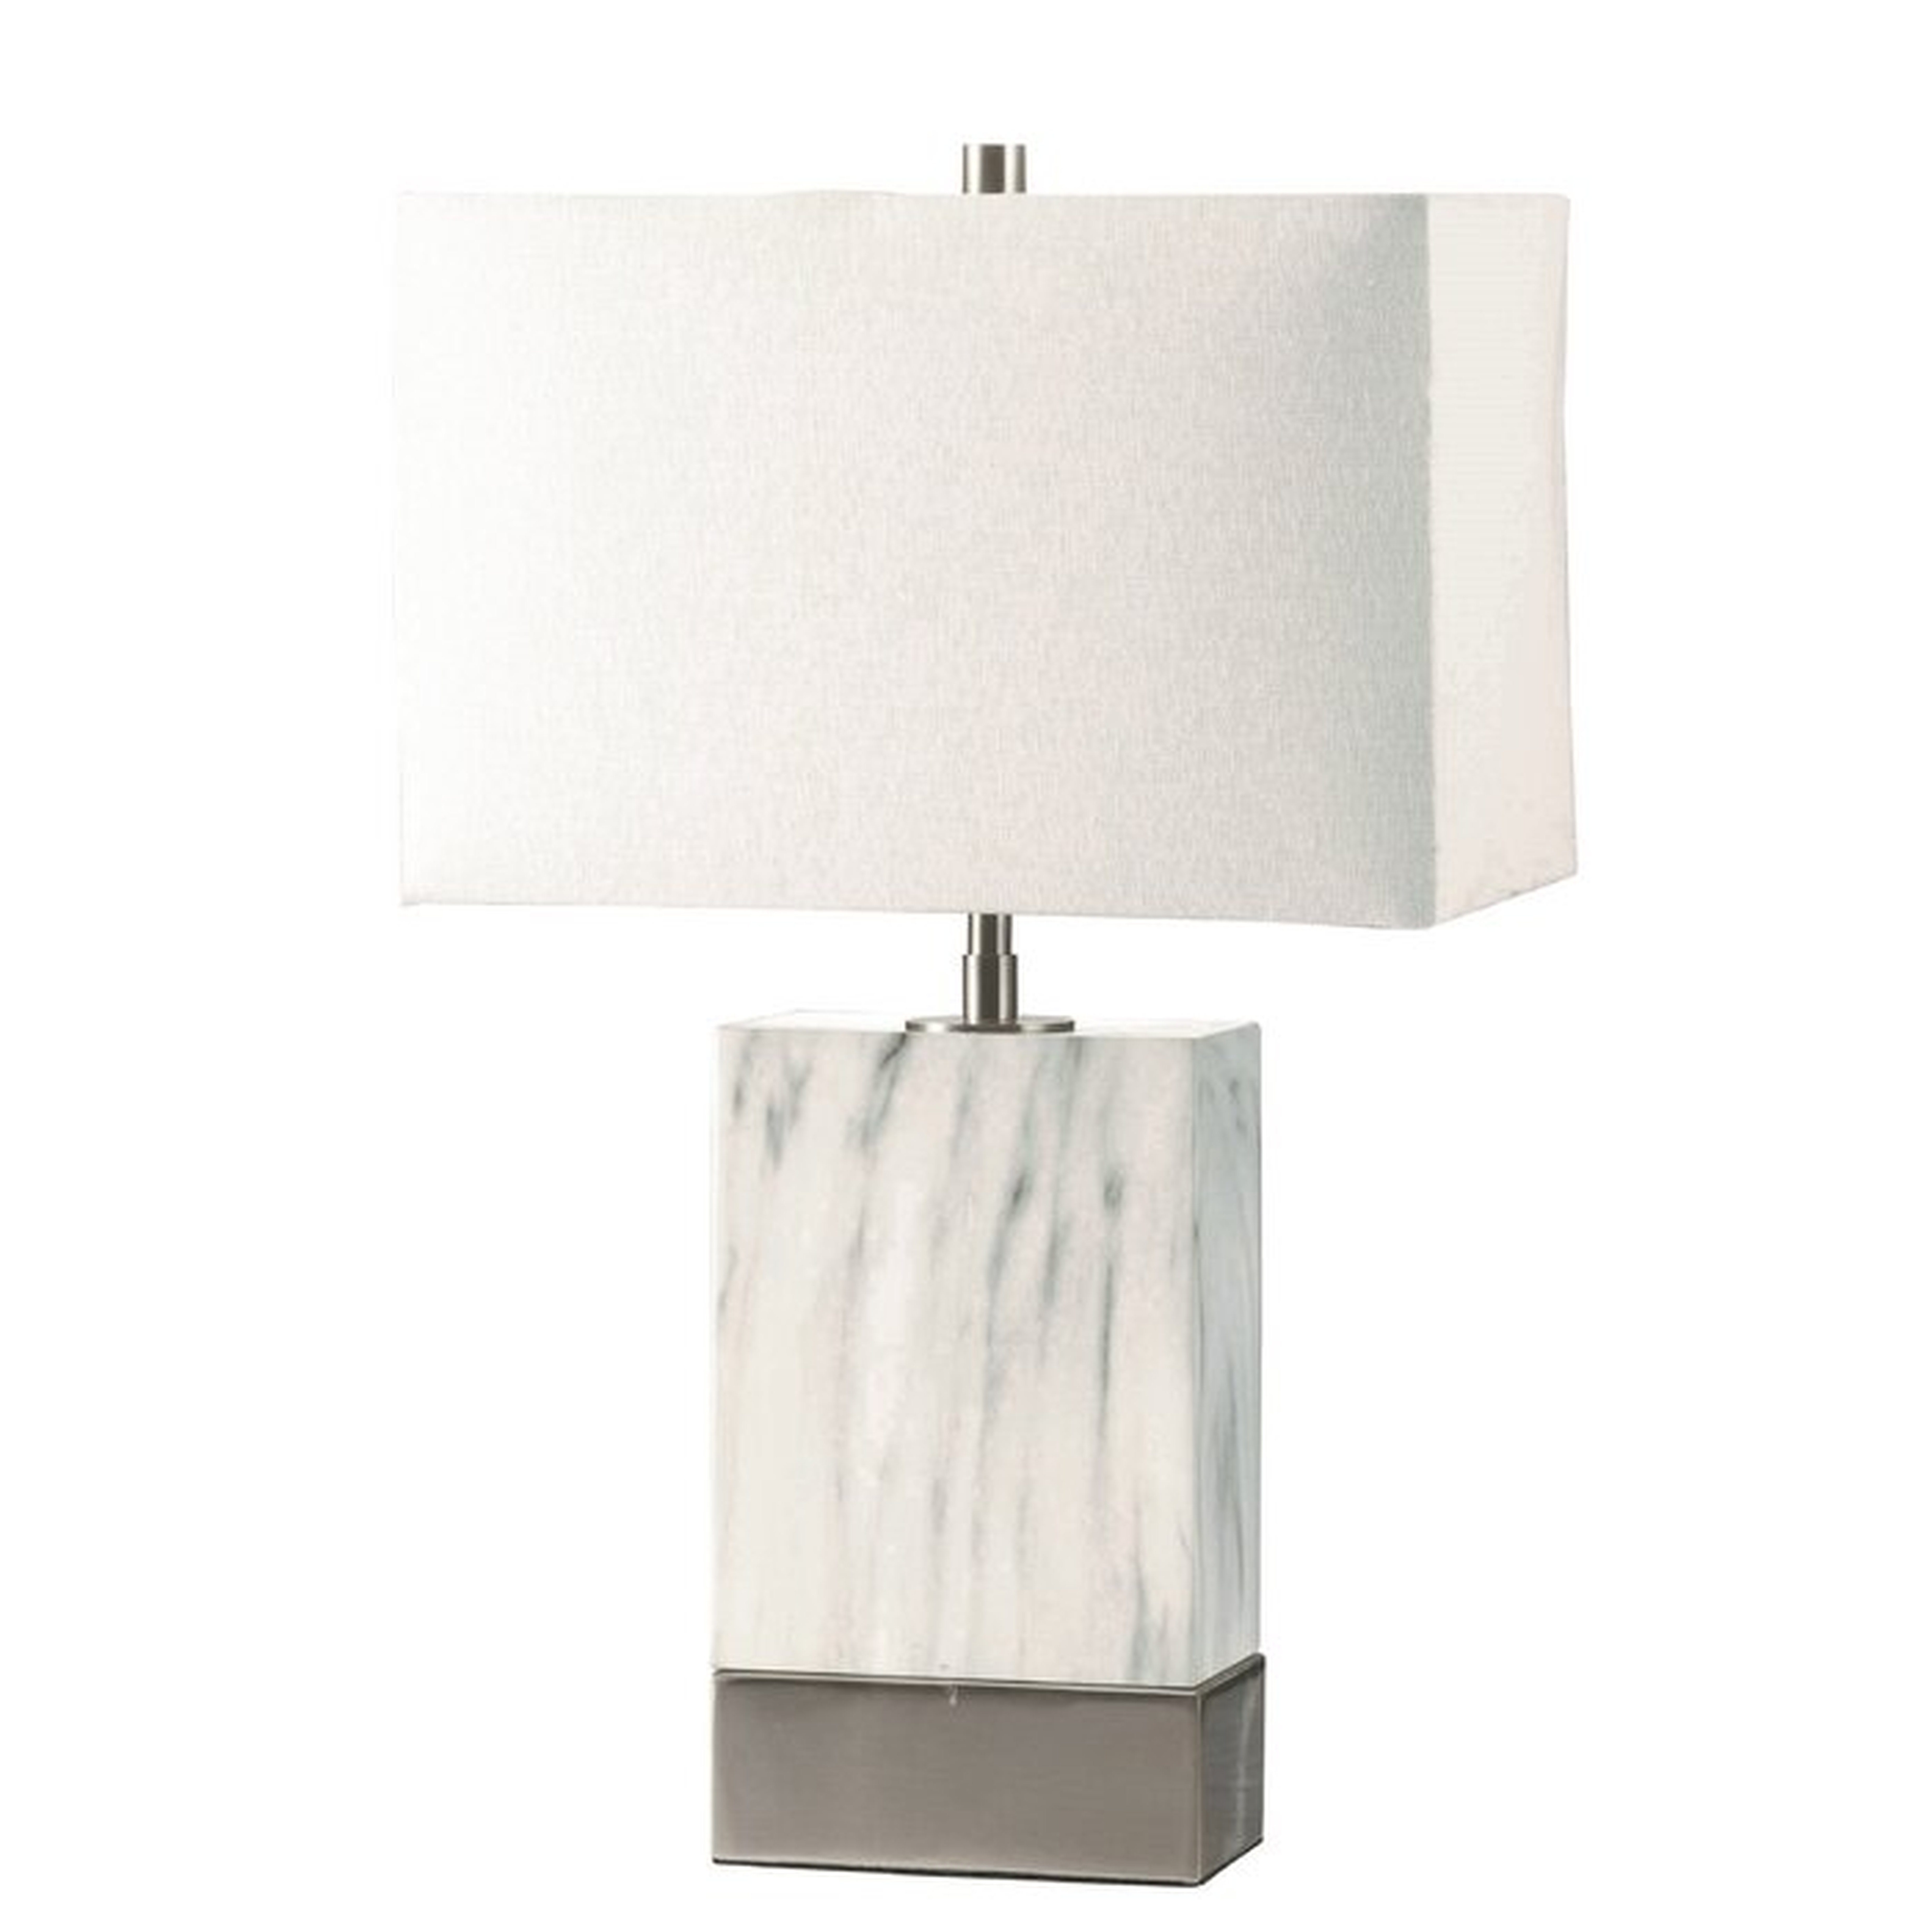 Schmidt Table Lamp in White and Brushed Steel - Wayfair